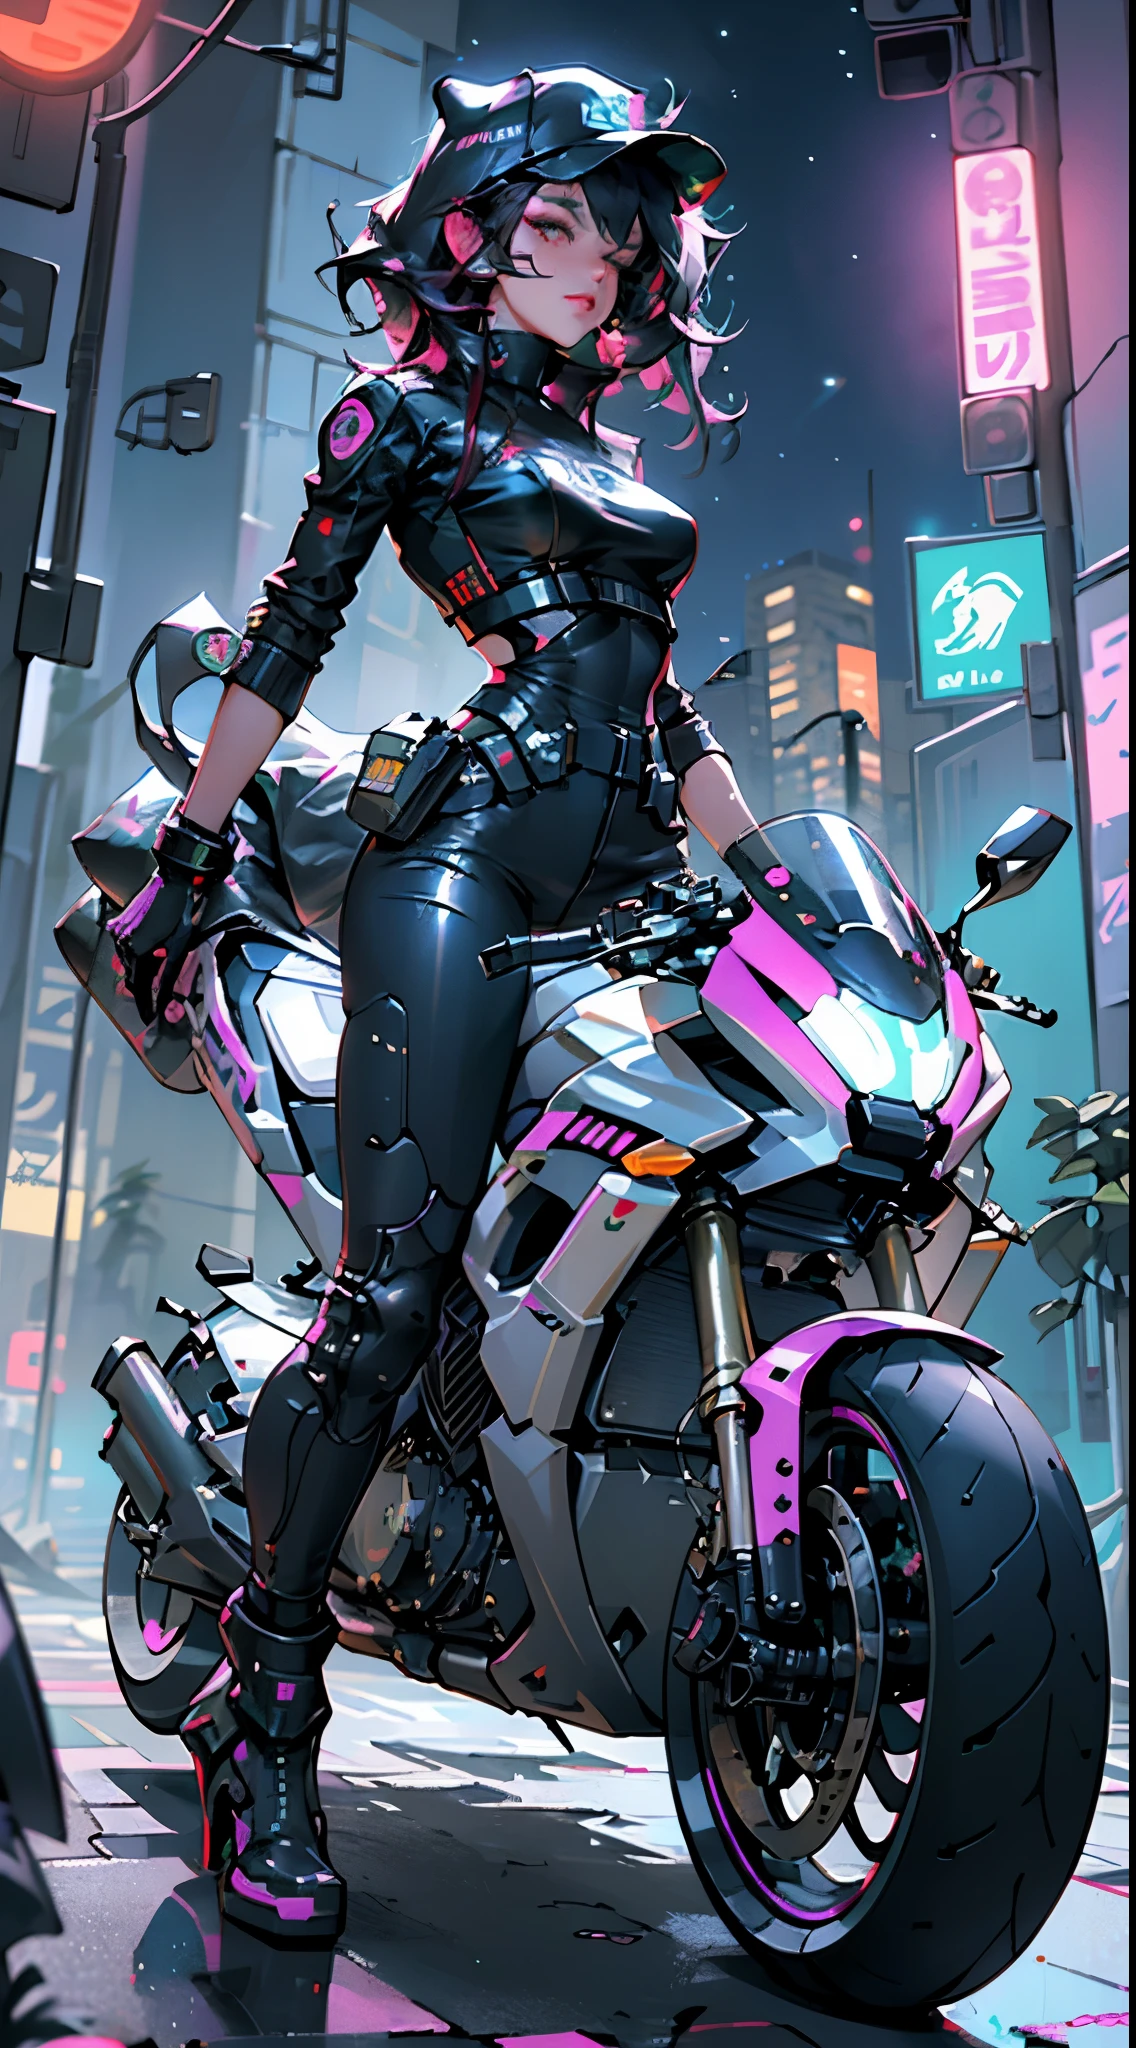 beautiful woman medium hair, wearing a hat, cyberpunk short clothes, cyberpunk police woman, Tomboy, Traffic police, (futuristic police motorcycle ride 1.0), Police Hovercycle Patrol, night, neon